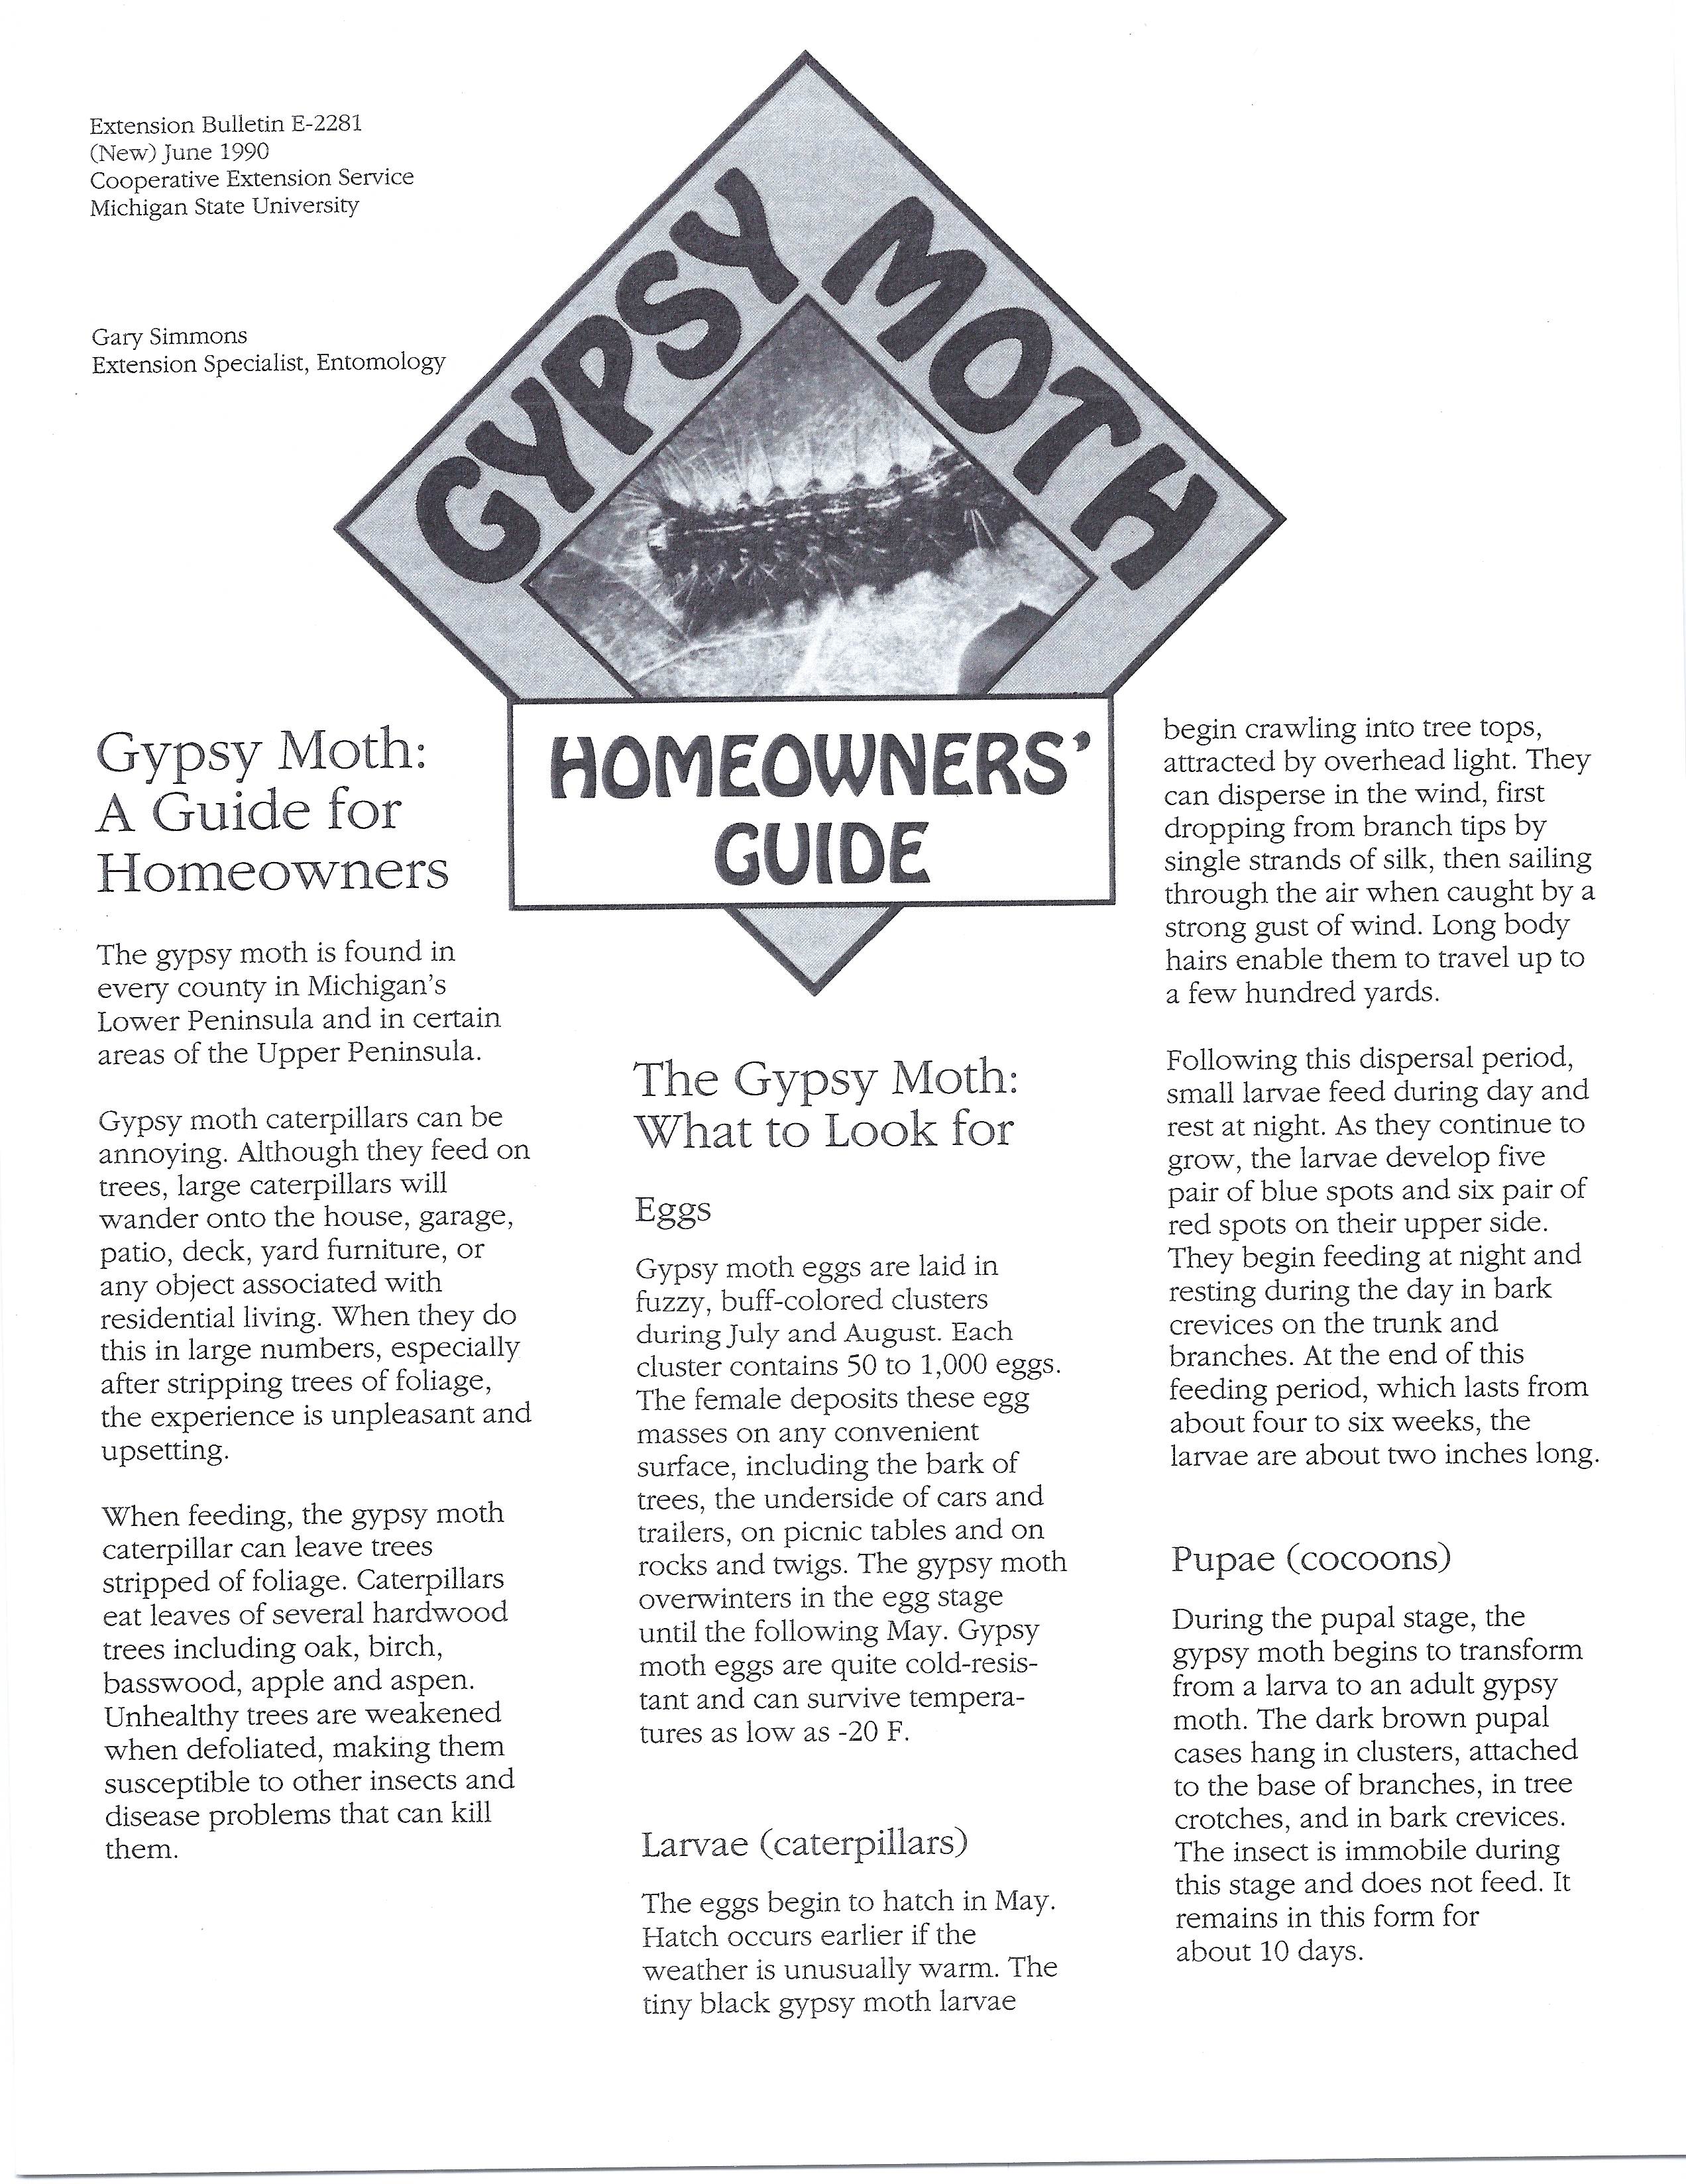 Info about controlling gypsy moth_Page_5